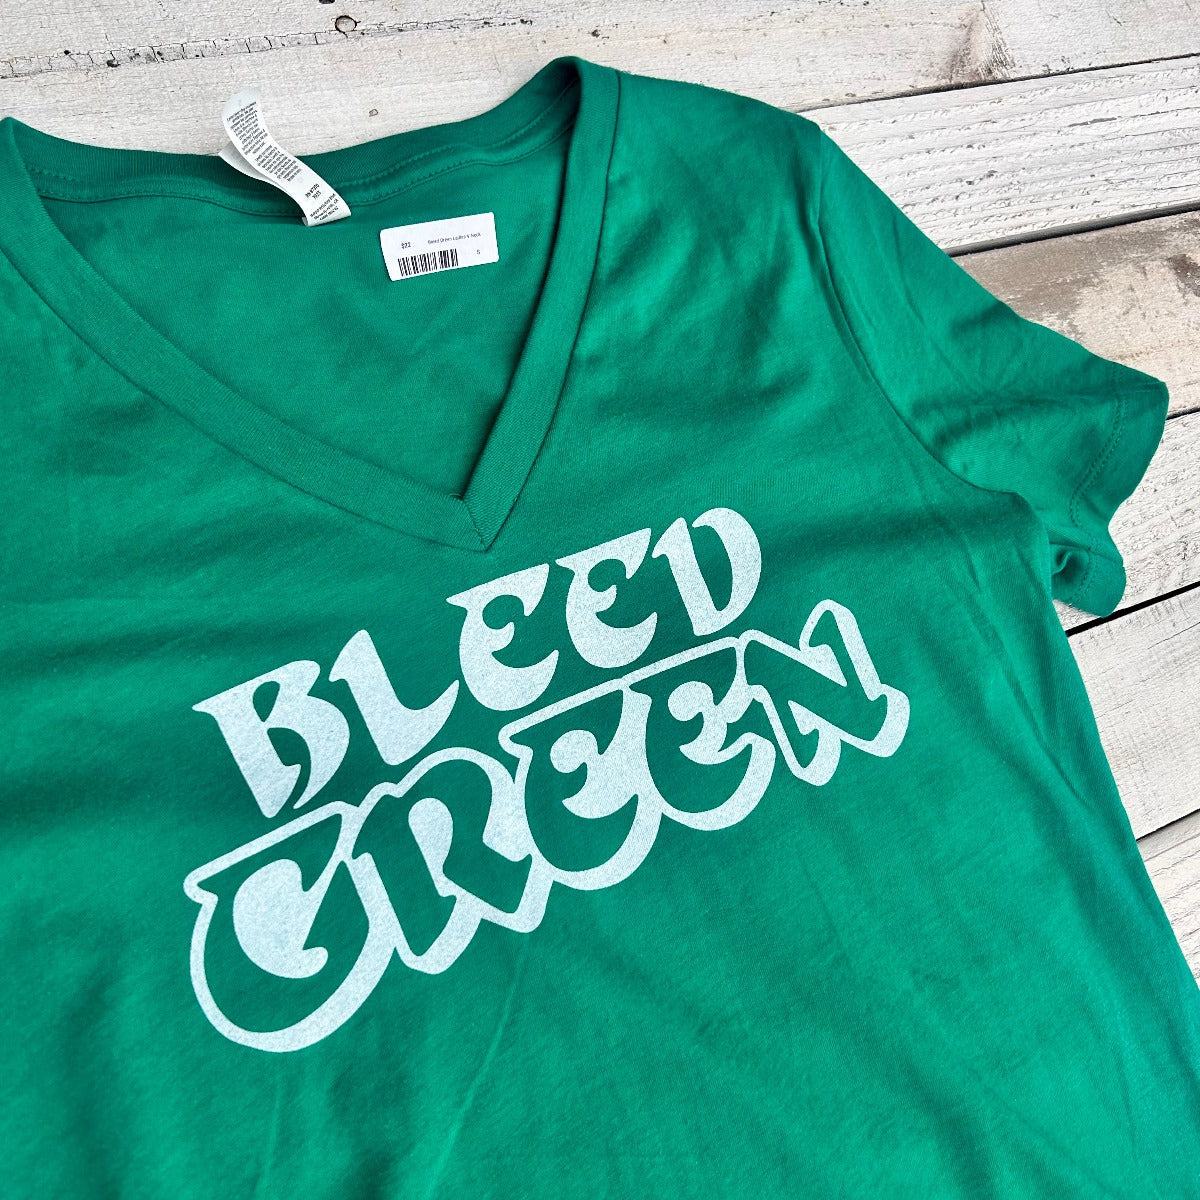 BlueRooted Bleed Green Ladies V Neck